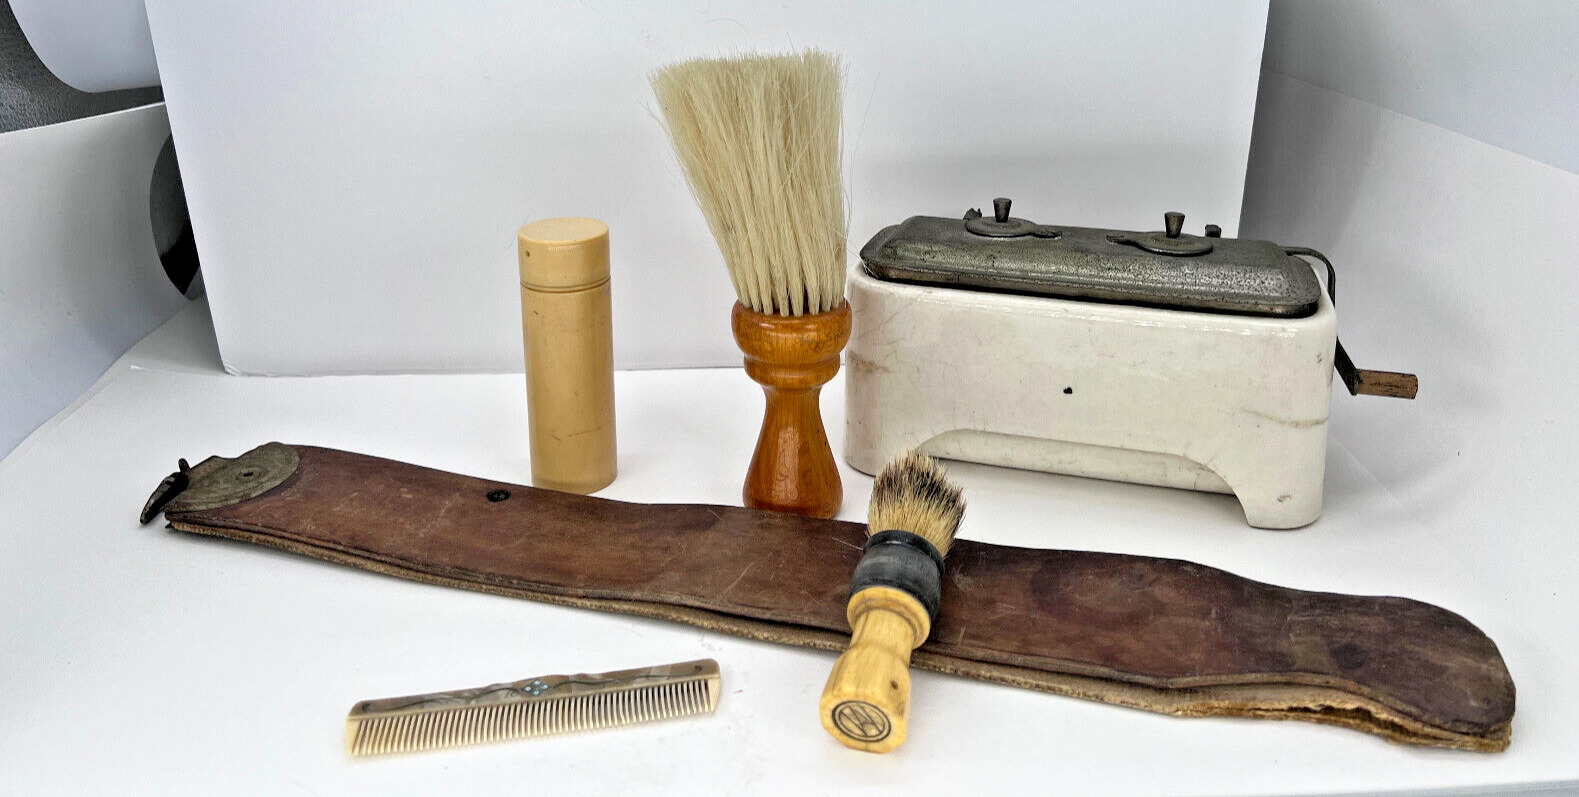 Antique Barber Equipment 2 side leather Strop steam tray 2 shaving brushes comb